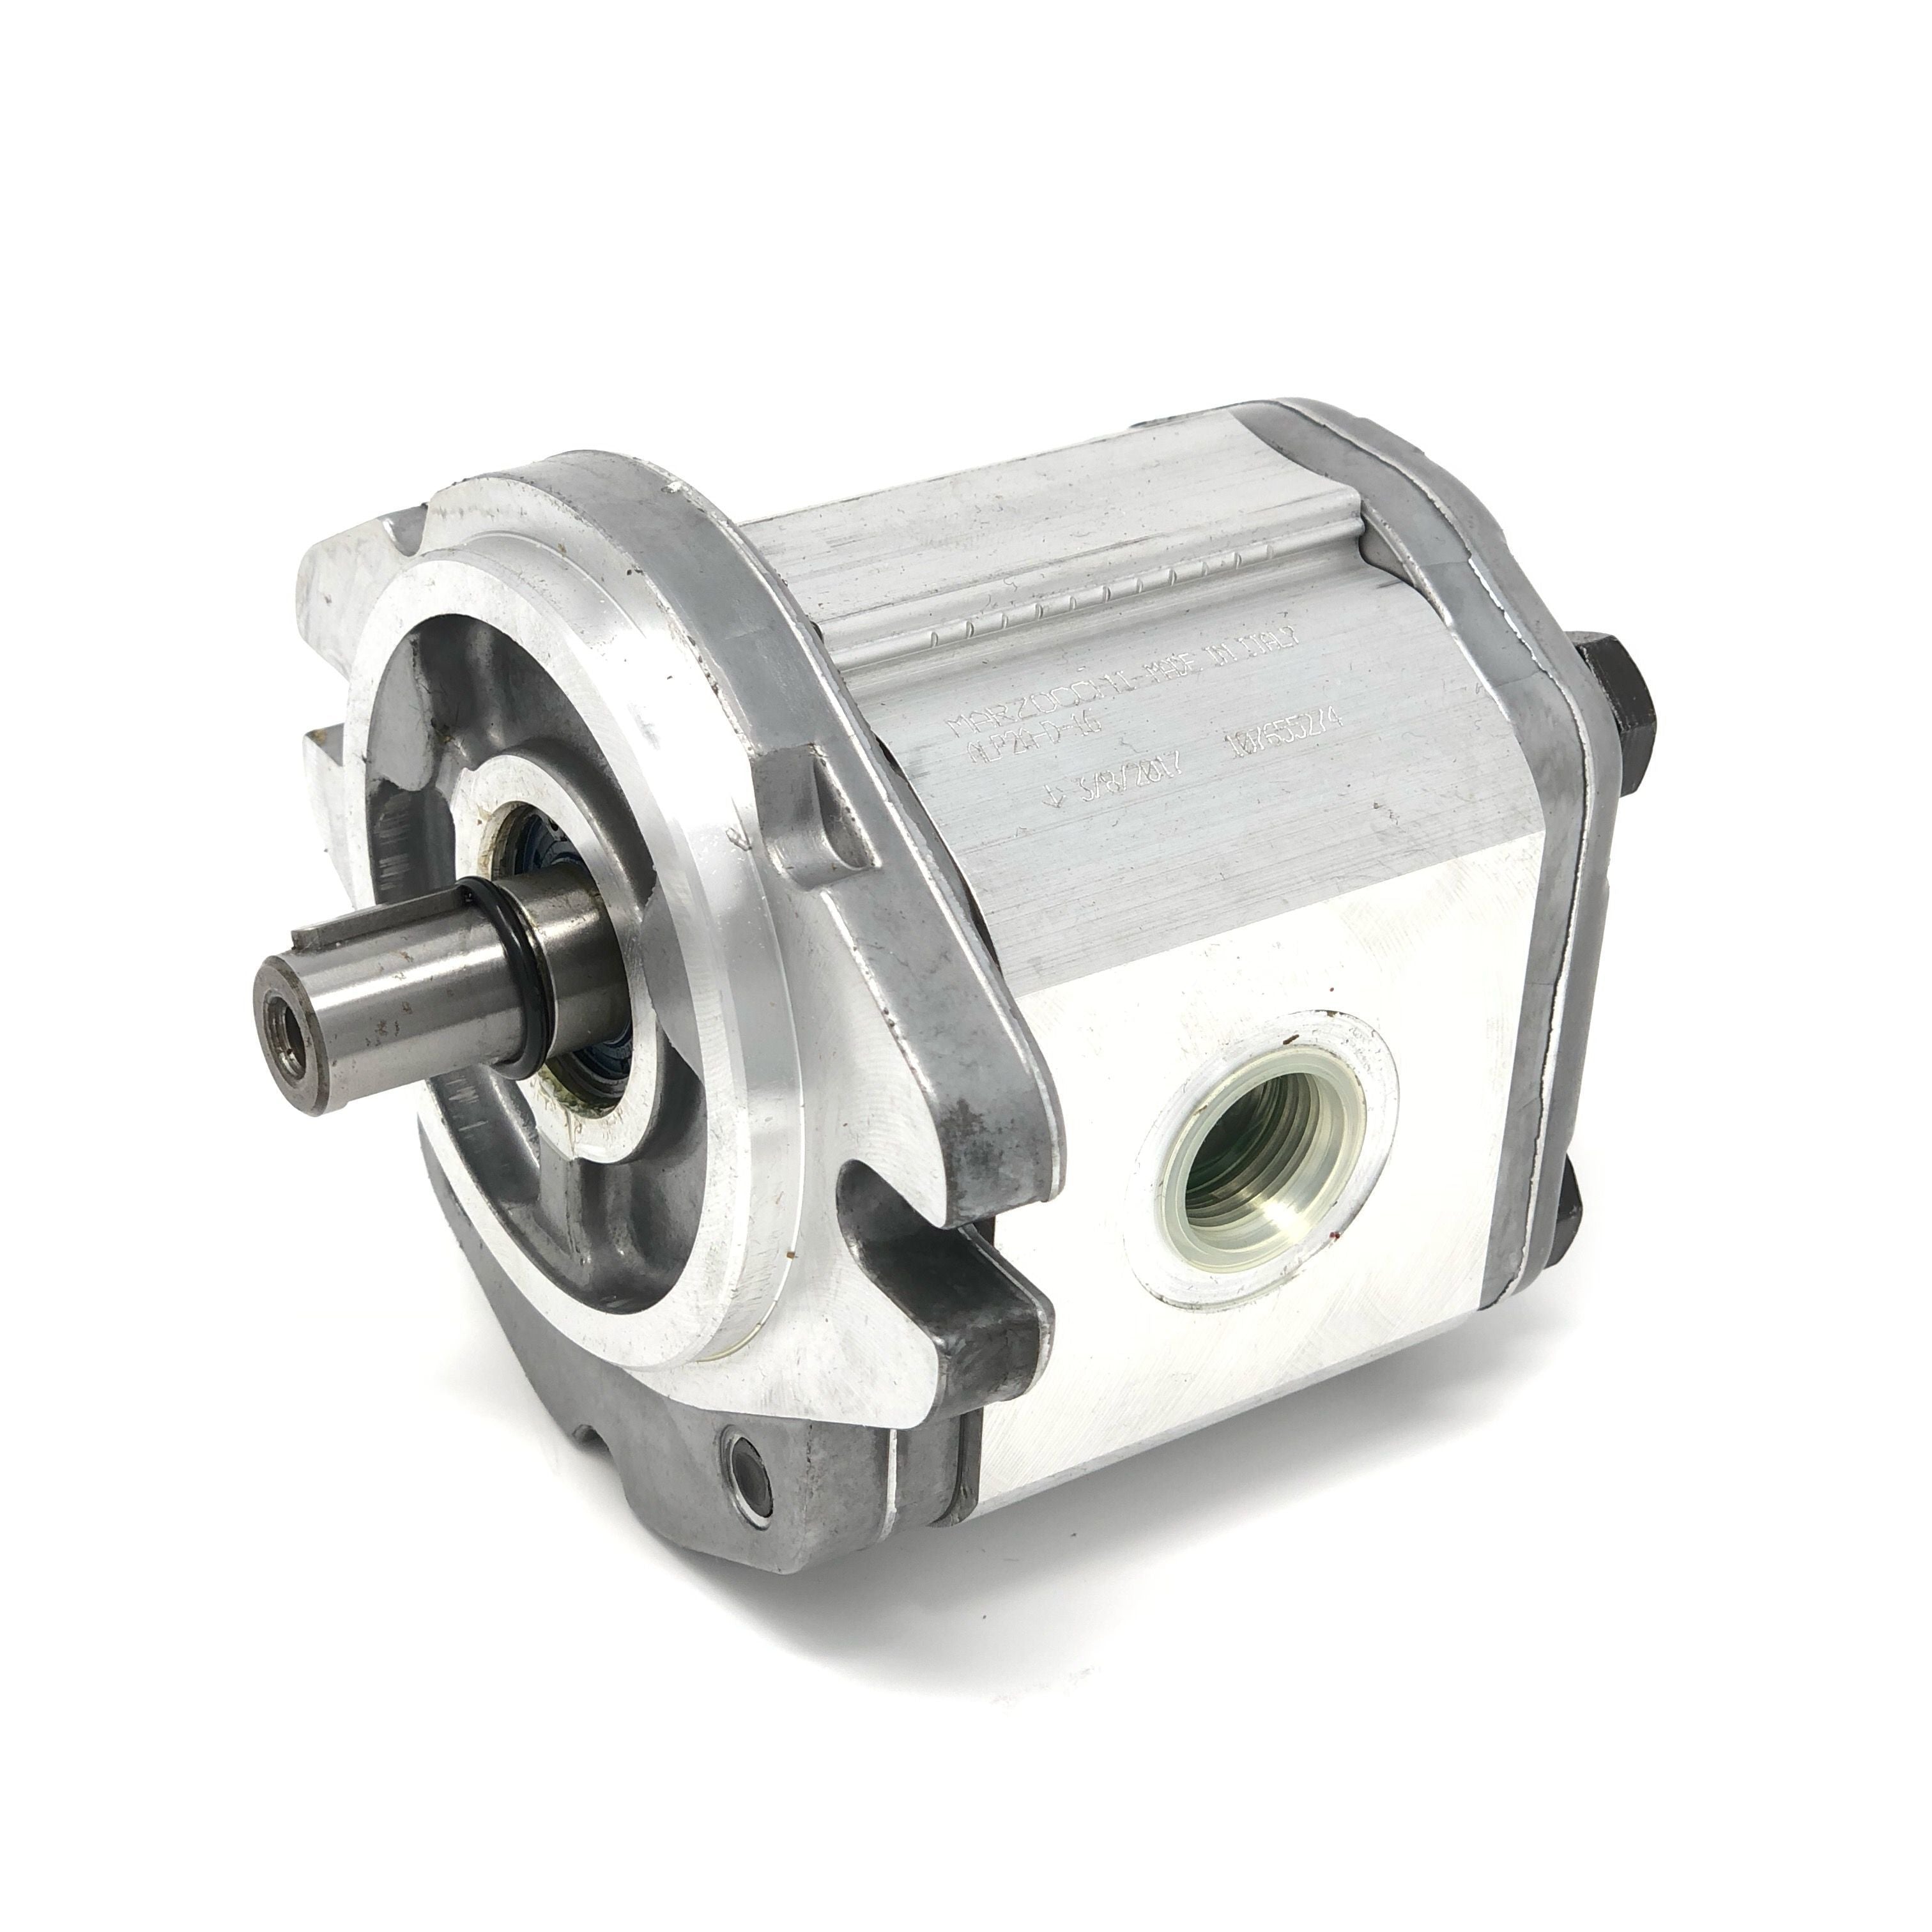 ALP1A-D-5 : Marzocchi Gear Pump, CW, 3.5cc (0.2135in3), 1.66 GPM, 3625psi, 5000 RPM, #8 SAE (1/2") In, #6 SAE (3/8") Out, Keyed Shaft 1/2" Bore x 1/8" Key, SAE AA 2-Bolt Mount